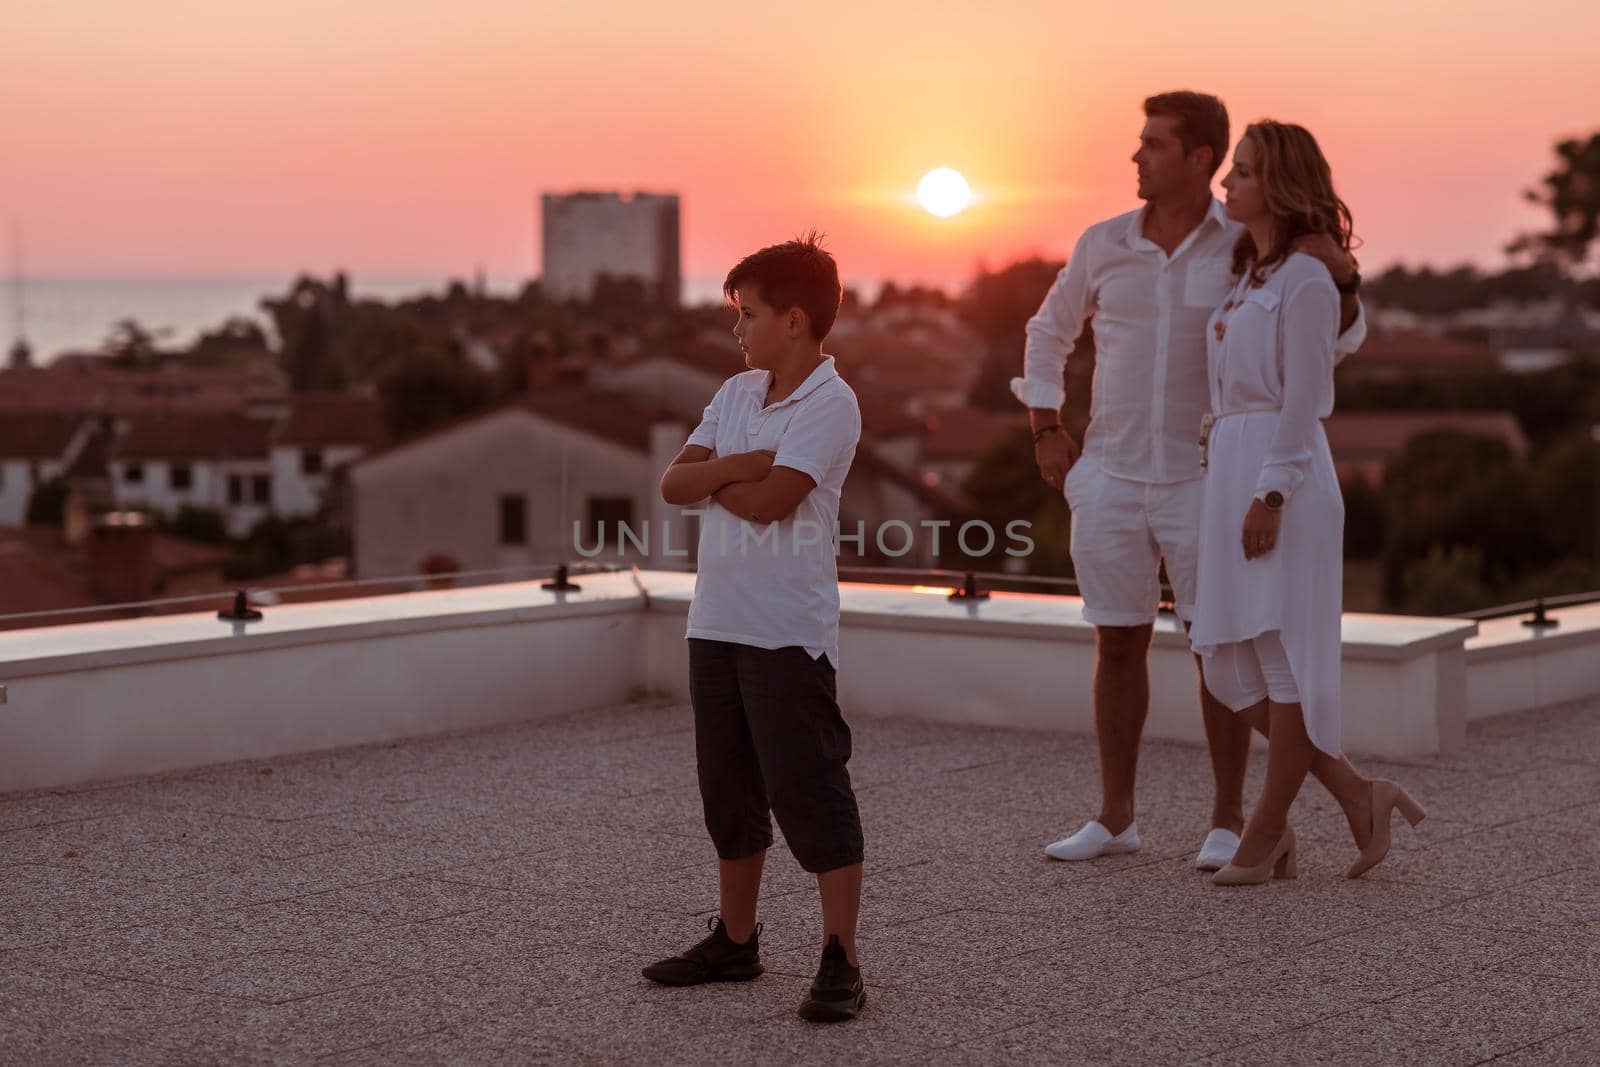 Happy family enjoys and spends time together on the roof of the house while watching the sunset on the open sea together by dotshock